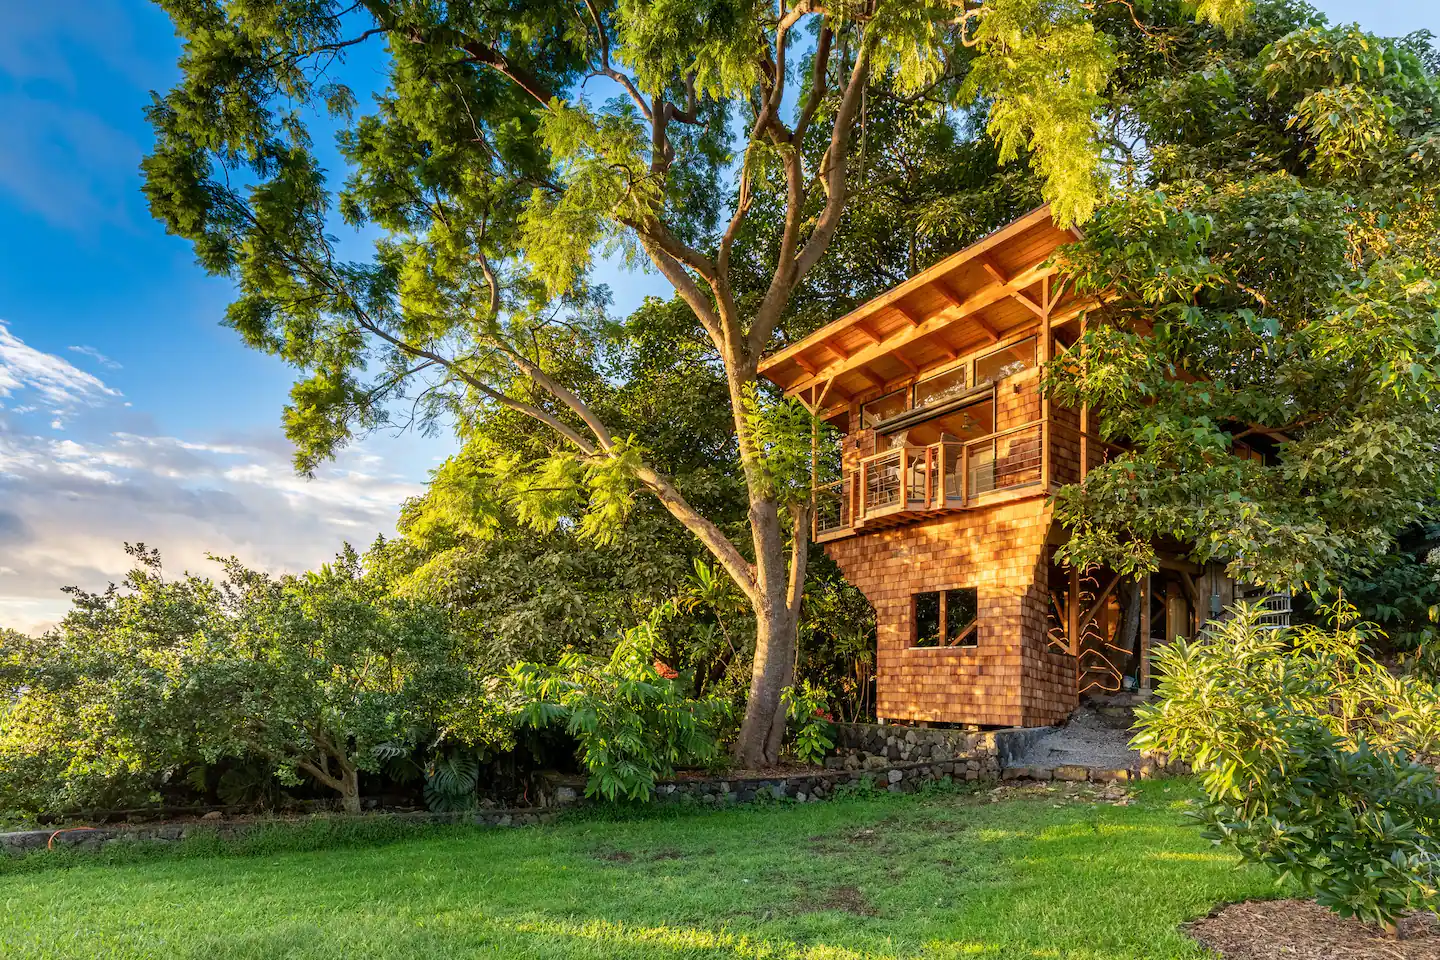 Kona Treehouse, one of the best Airbnbs in Hawaii